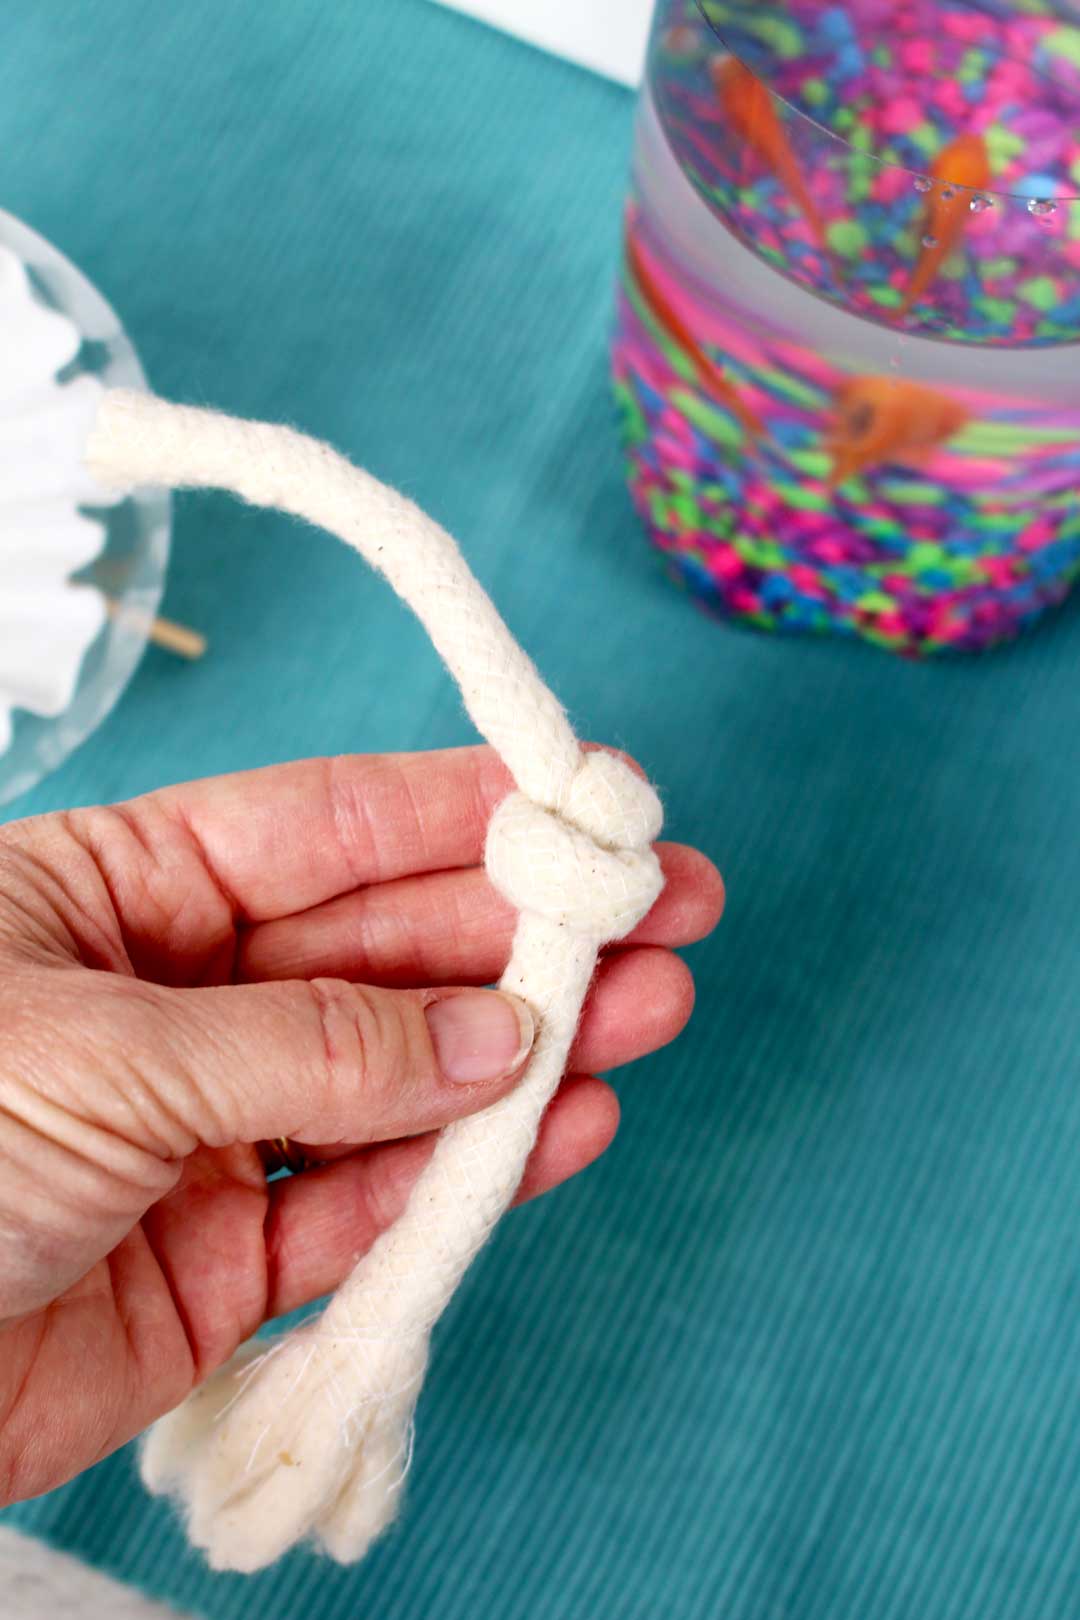 Hand holding cloth rope showing knot next to DIY fish tank and fish.